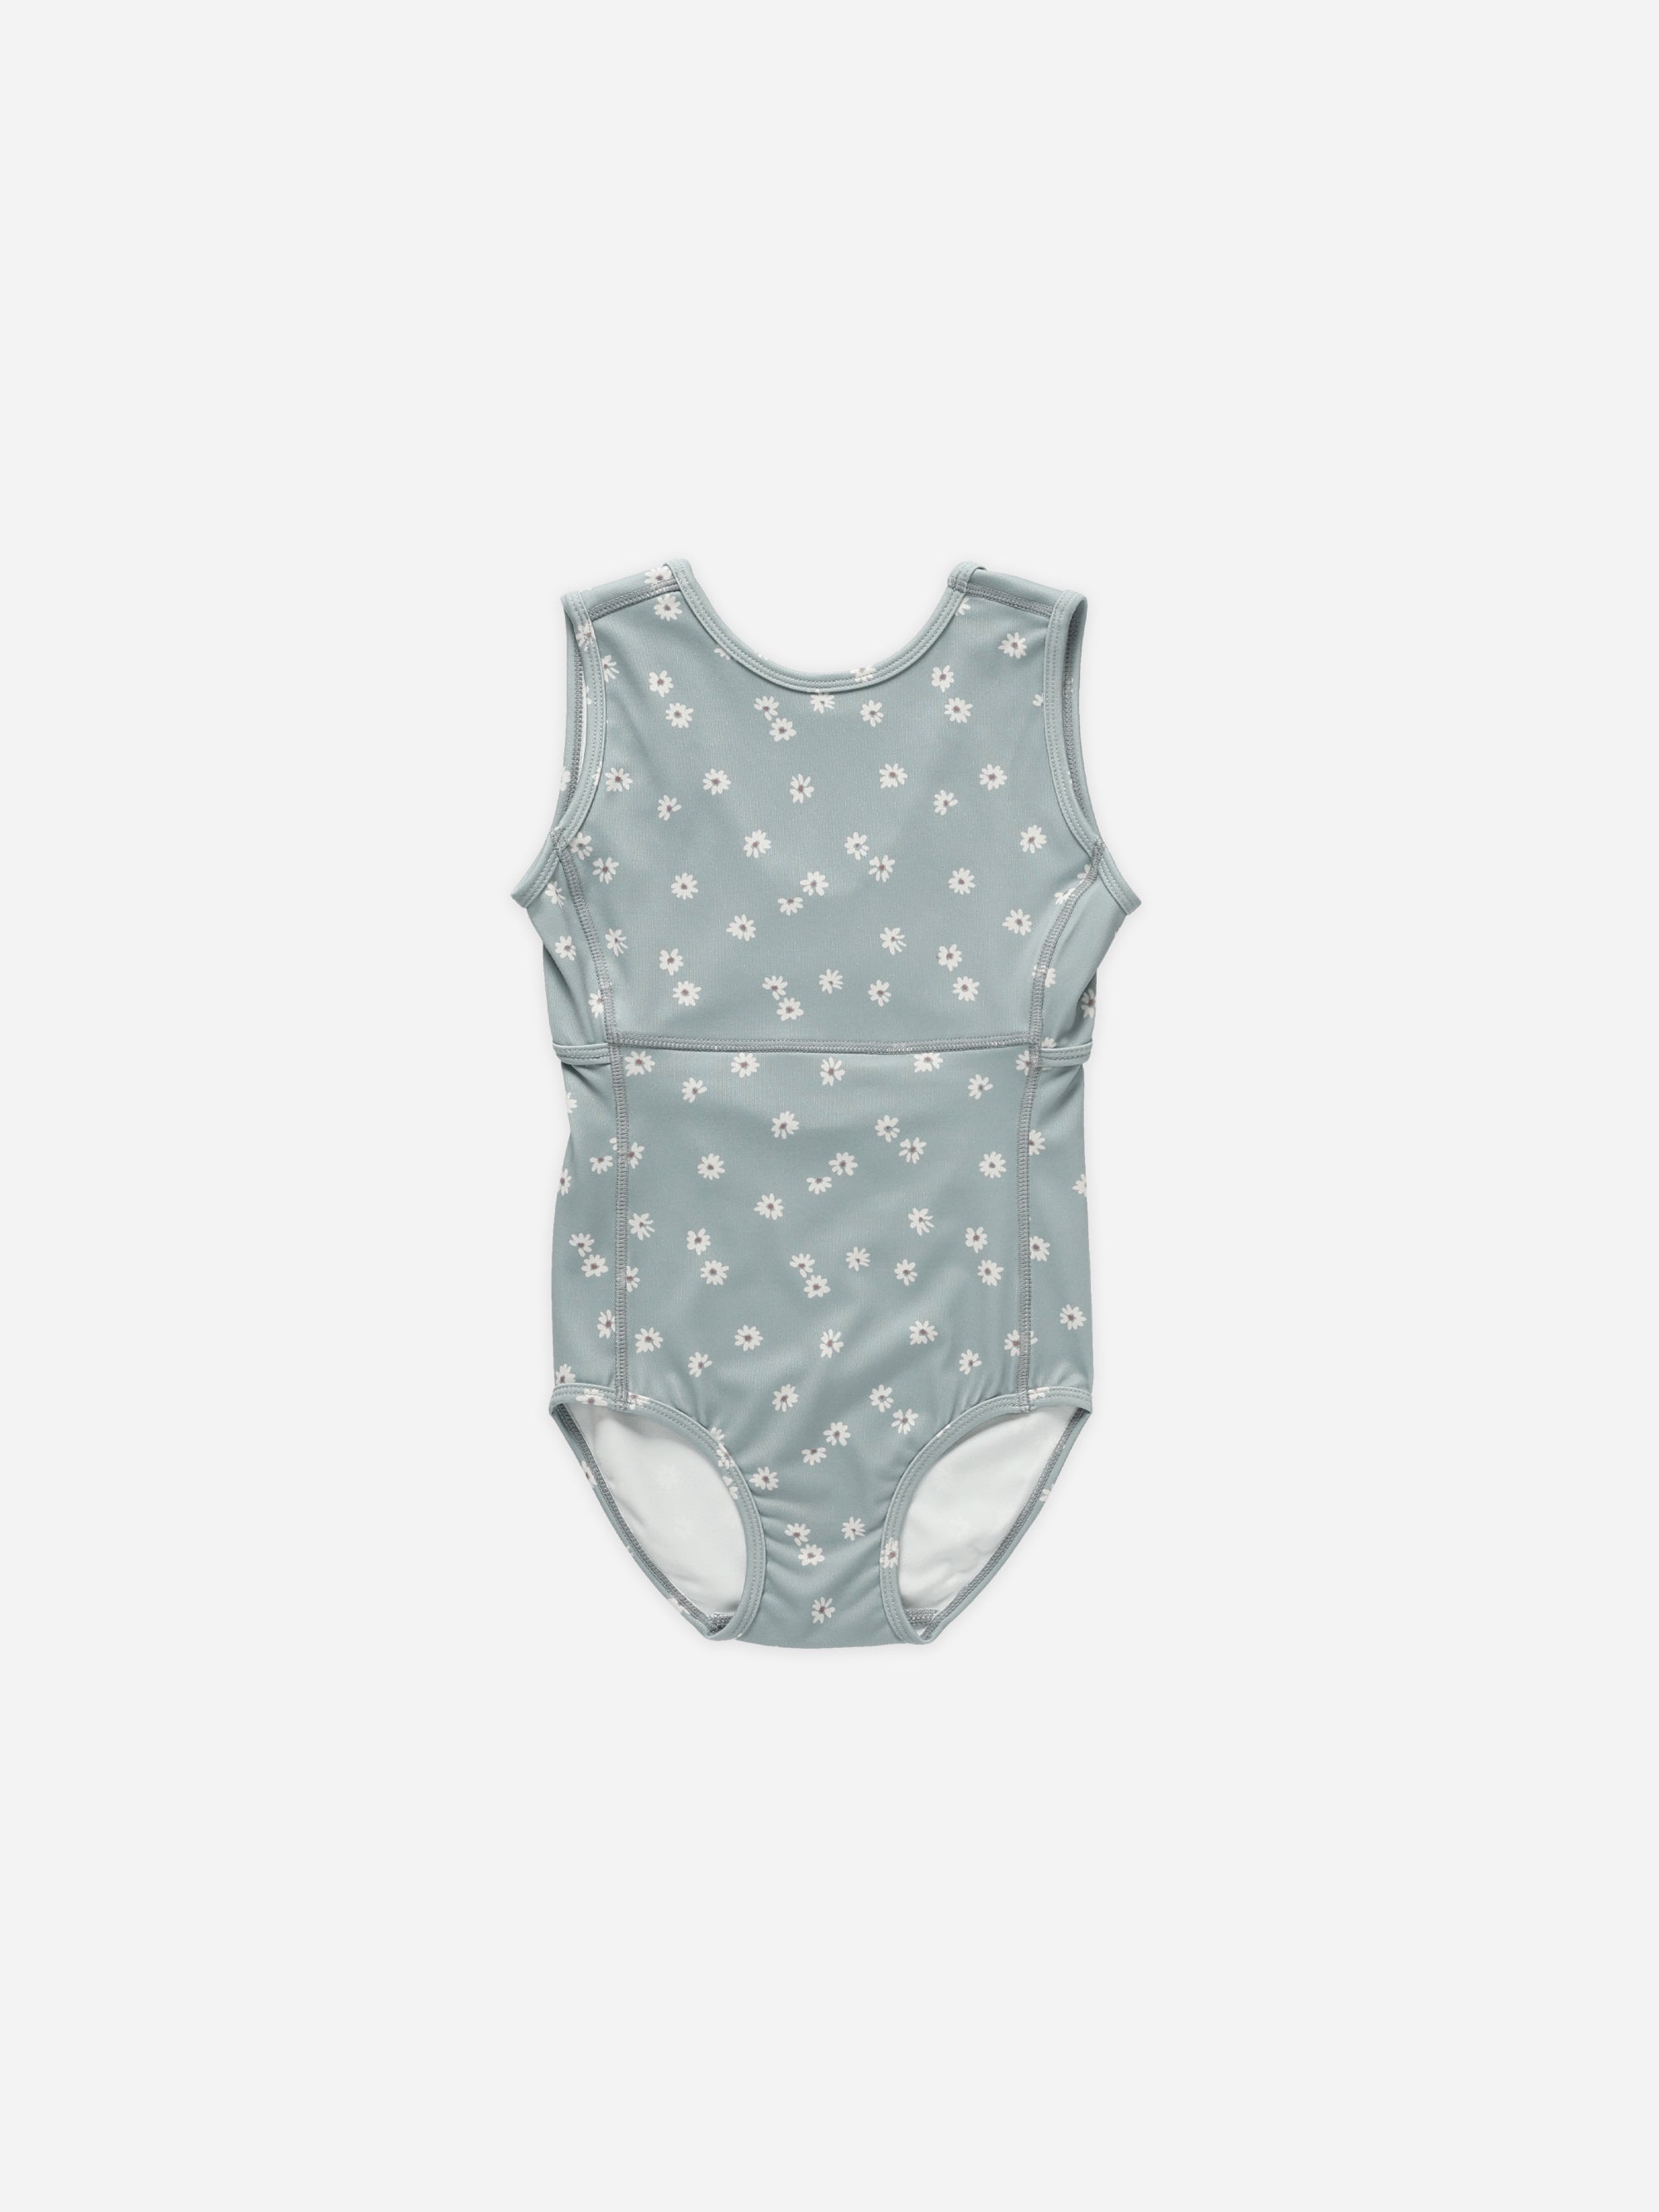 Keyhole Leotard || Blue Daisy - Rylee + Cru | Kids Clothes | Trendy Baby Clothes | Modern Infant Outfits |